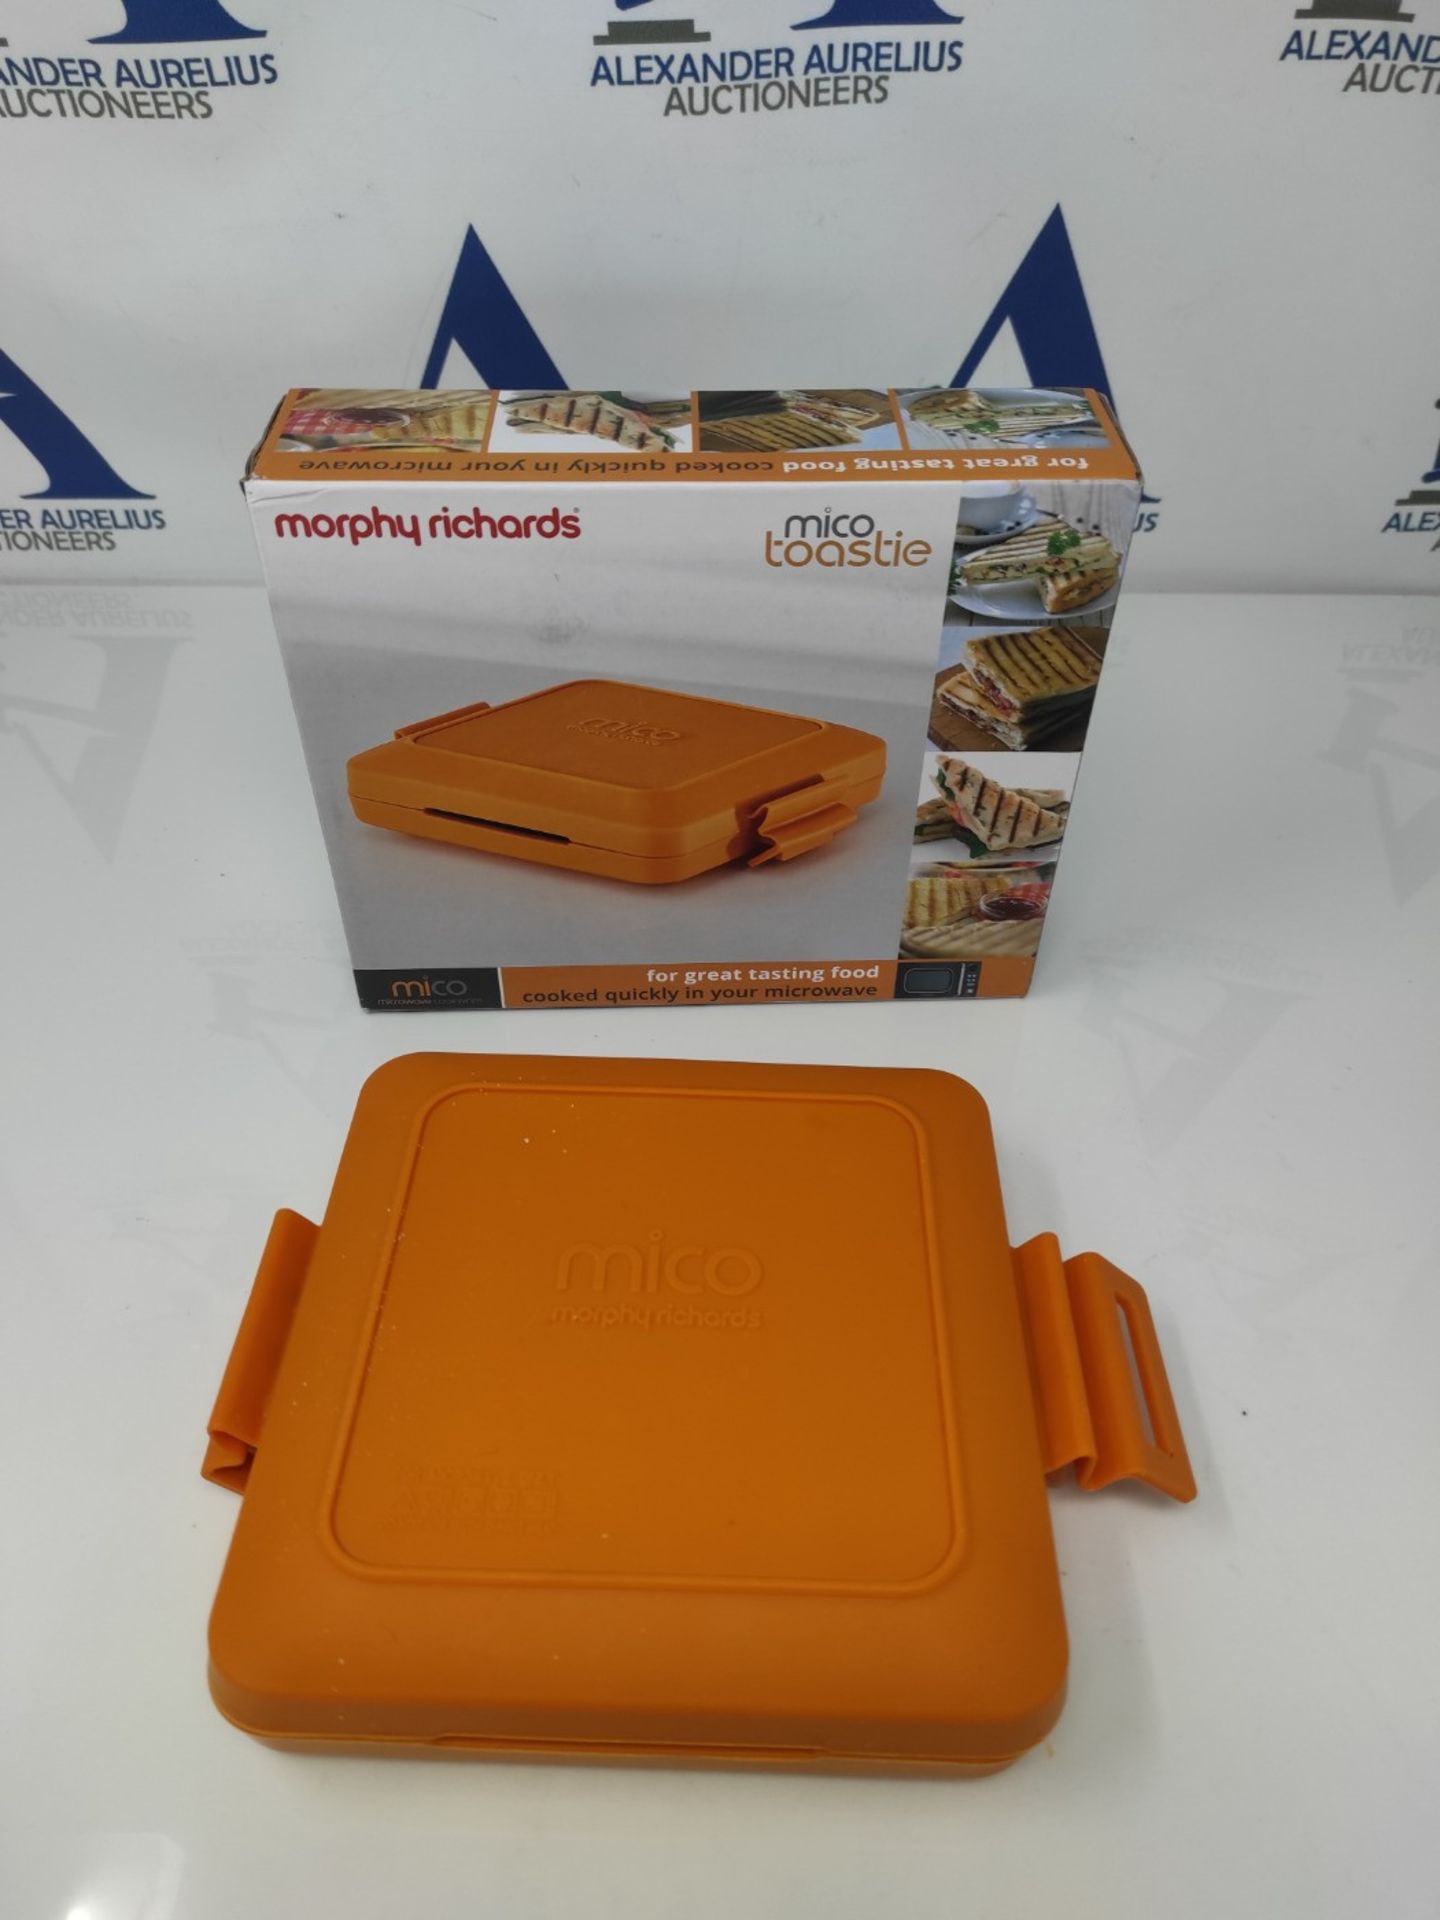 Morphy Richards Mico Microwave Toastie Sandwich Maker and Grill, Silicone Microwaveabl - Image 2 of 3